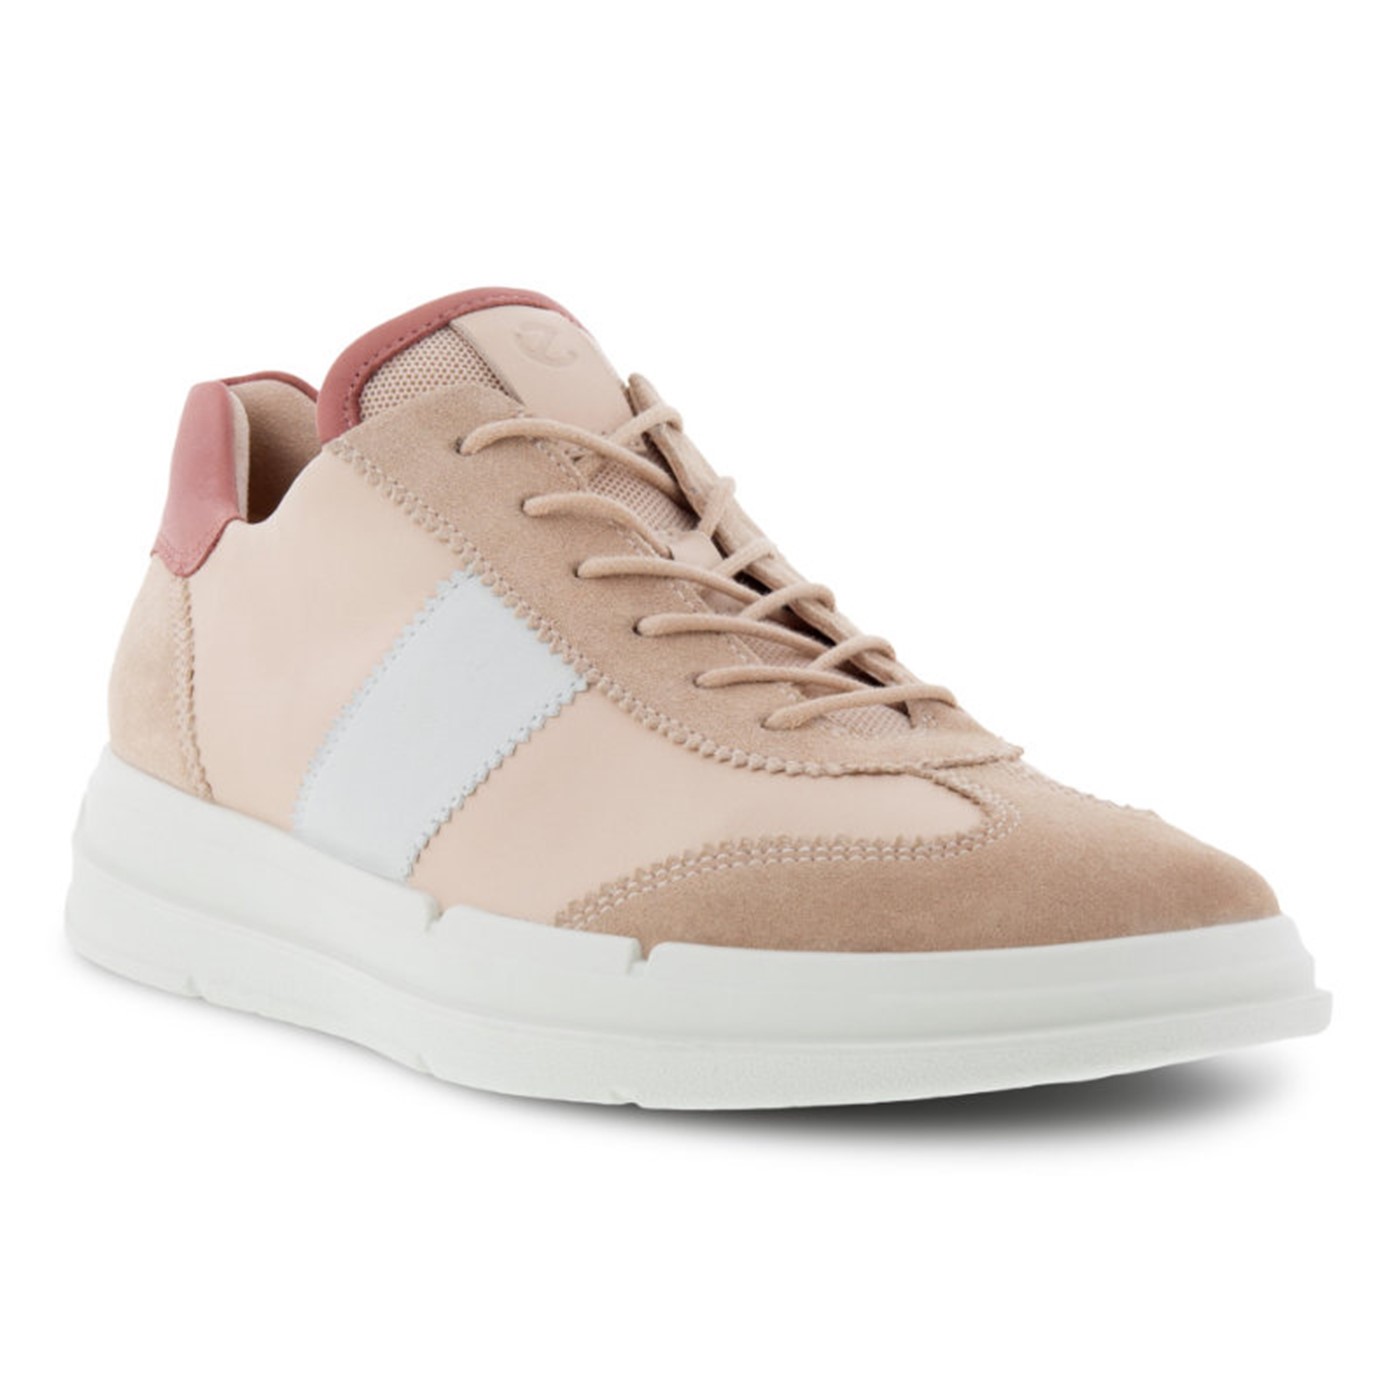 SOFT W - Sneakers dame – Rosa